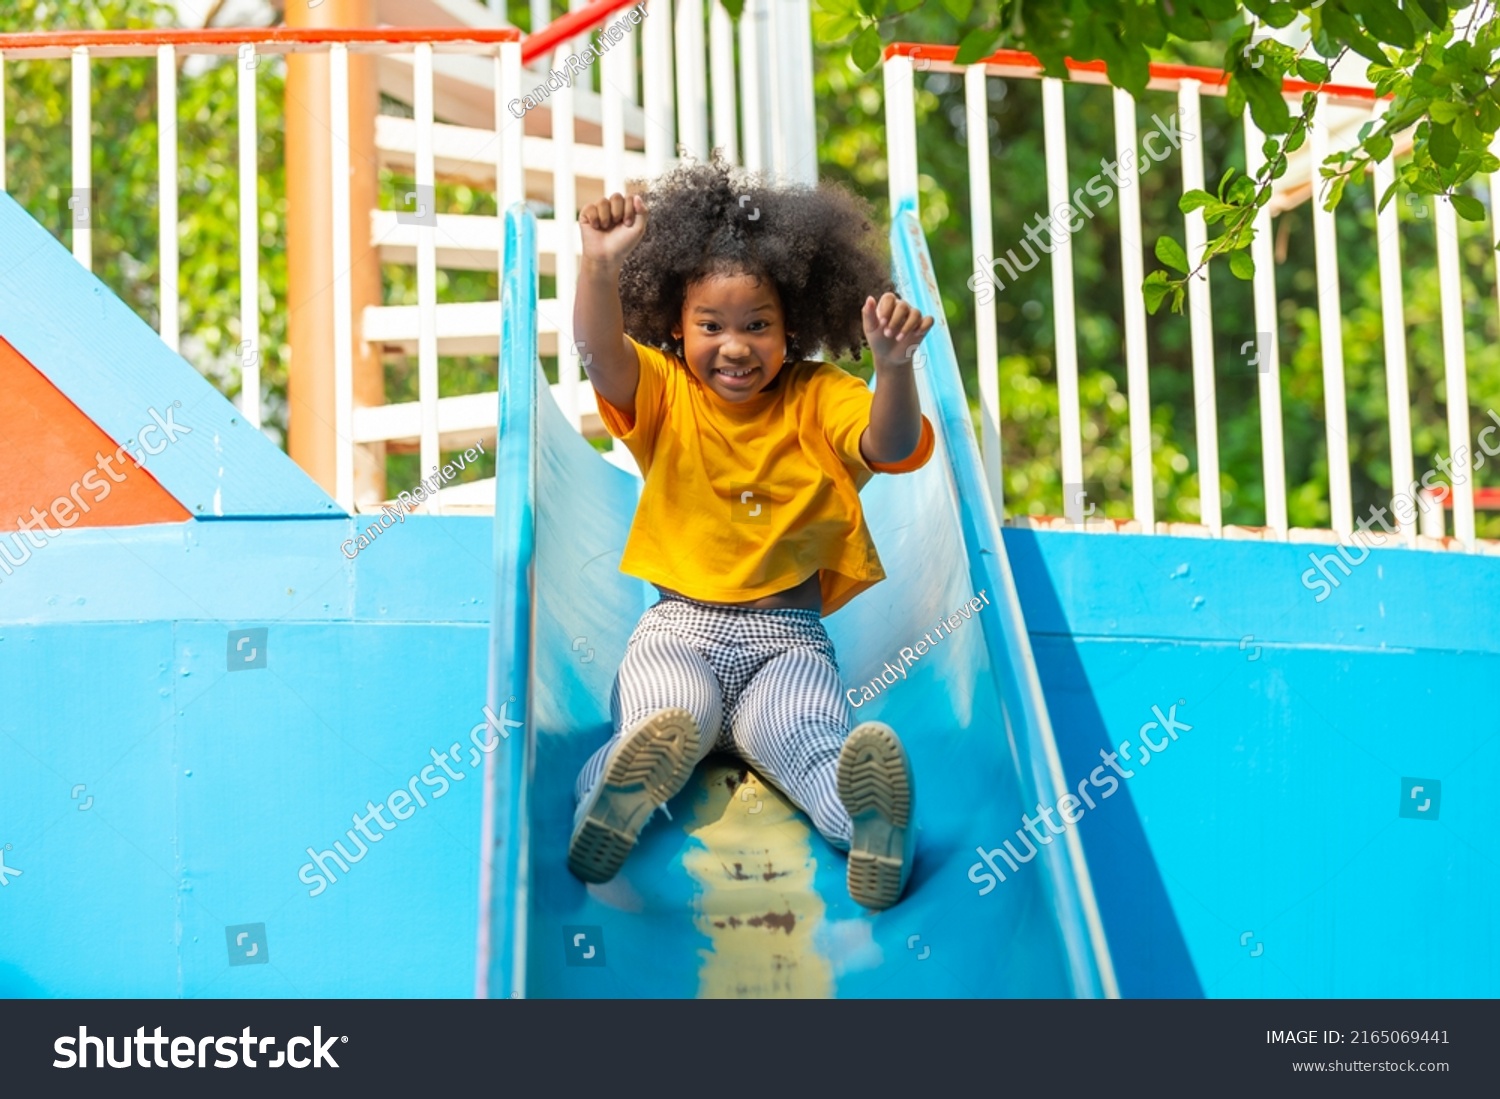 Happy Little African child girl sliding and playing at outdoor playground in the park on summer vacation. Kindergarten children kid enjoy and fun outdoor activity learning and exercising at school. #2165069441